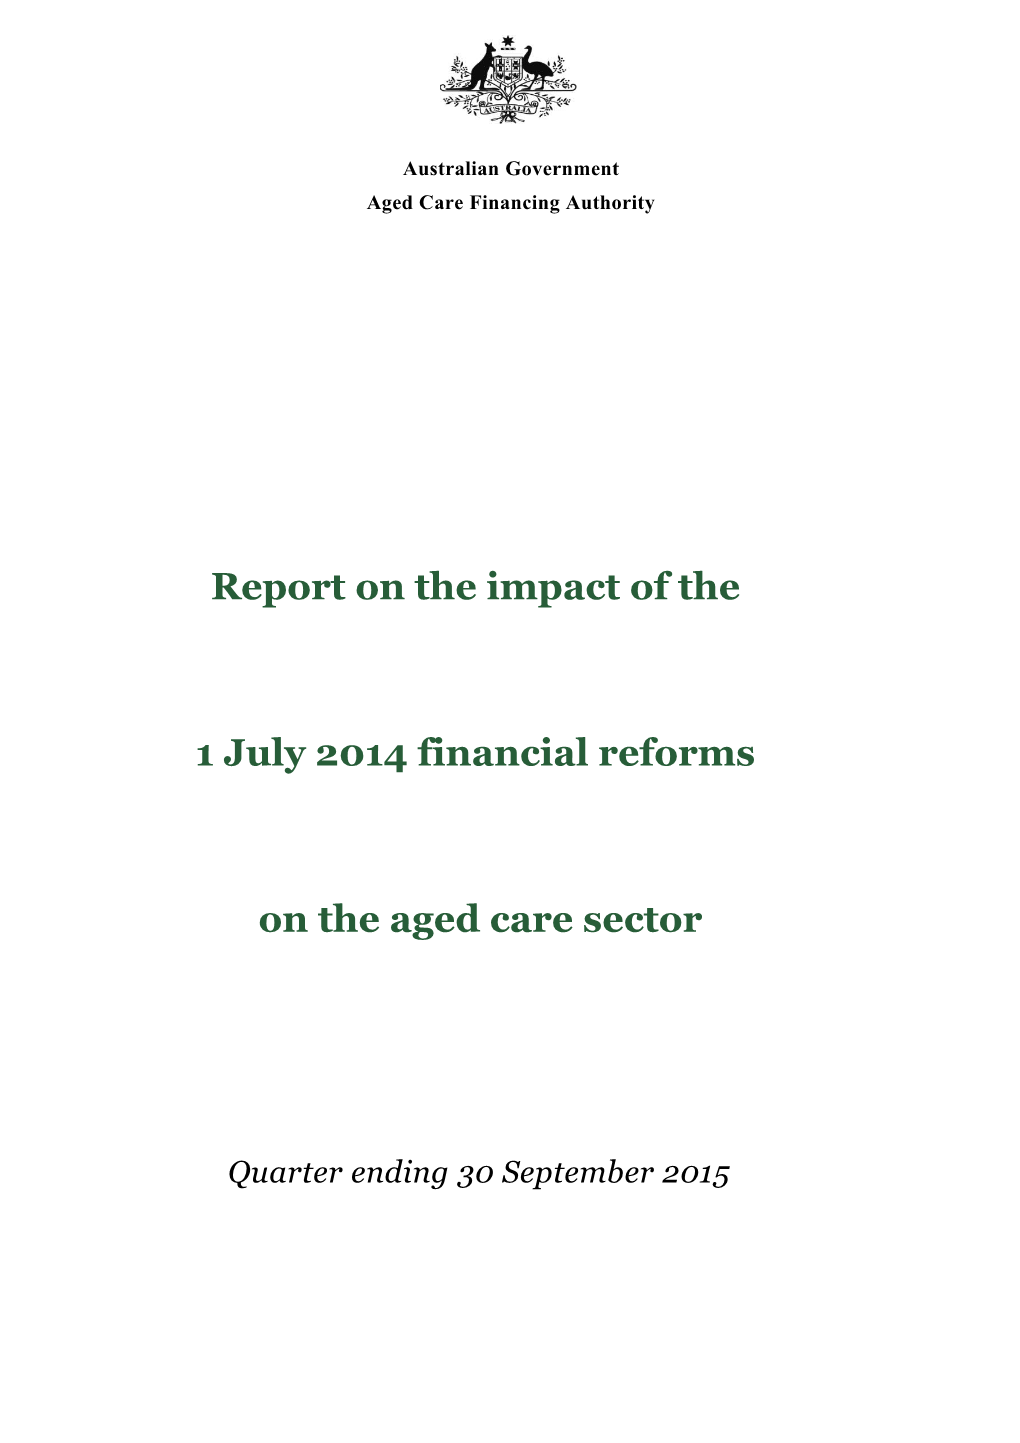 Report on the Impact of the 1 July 2014 Financial Reforms on the Aged Care Sector